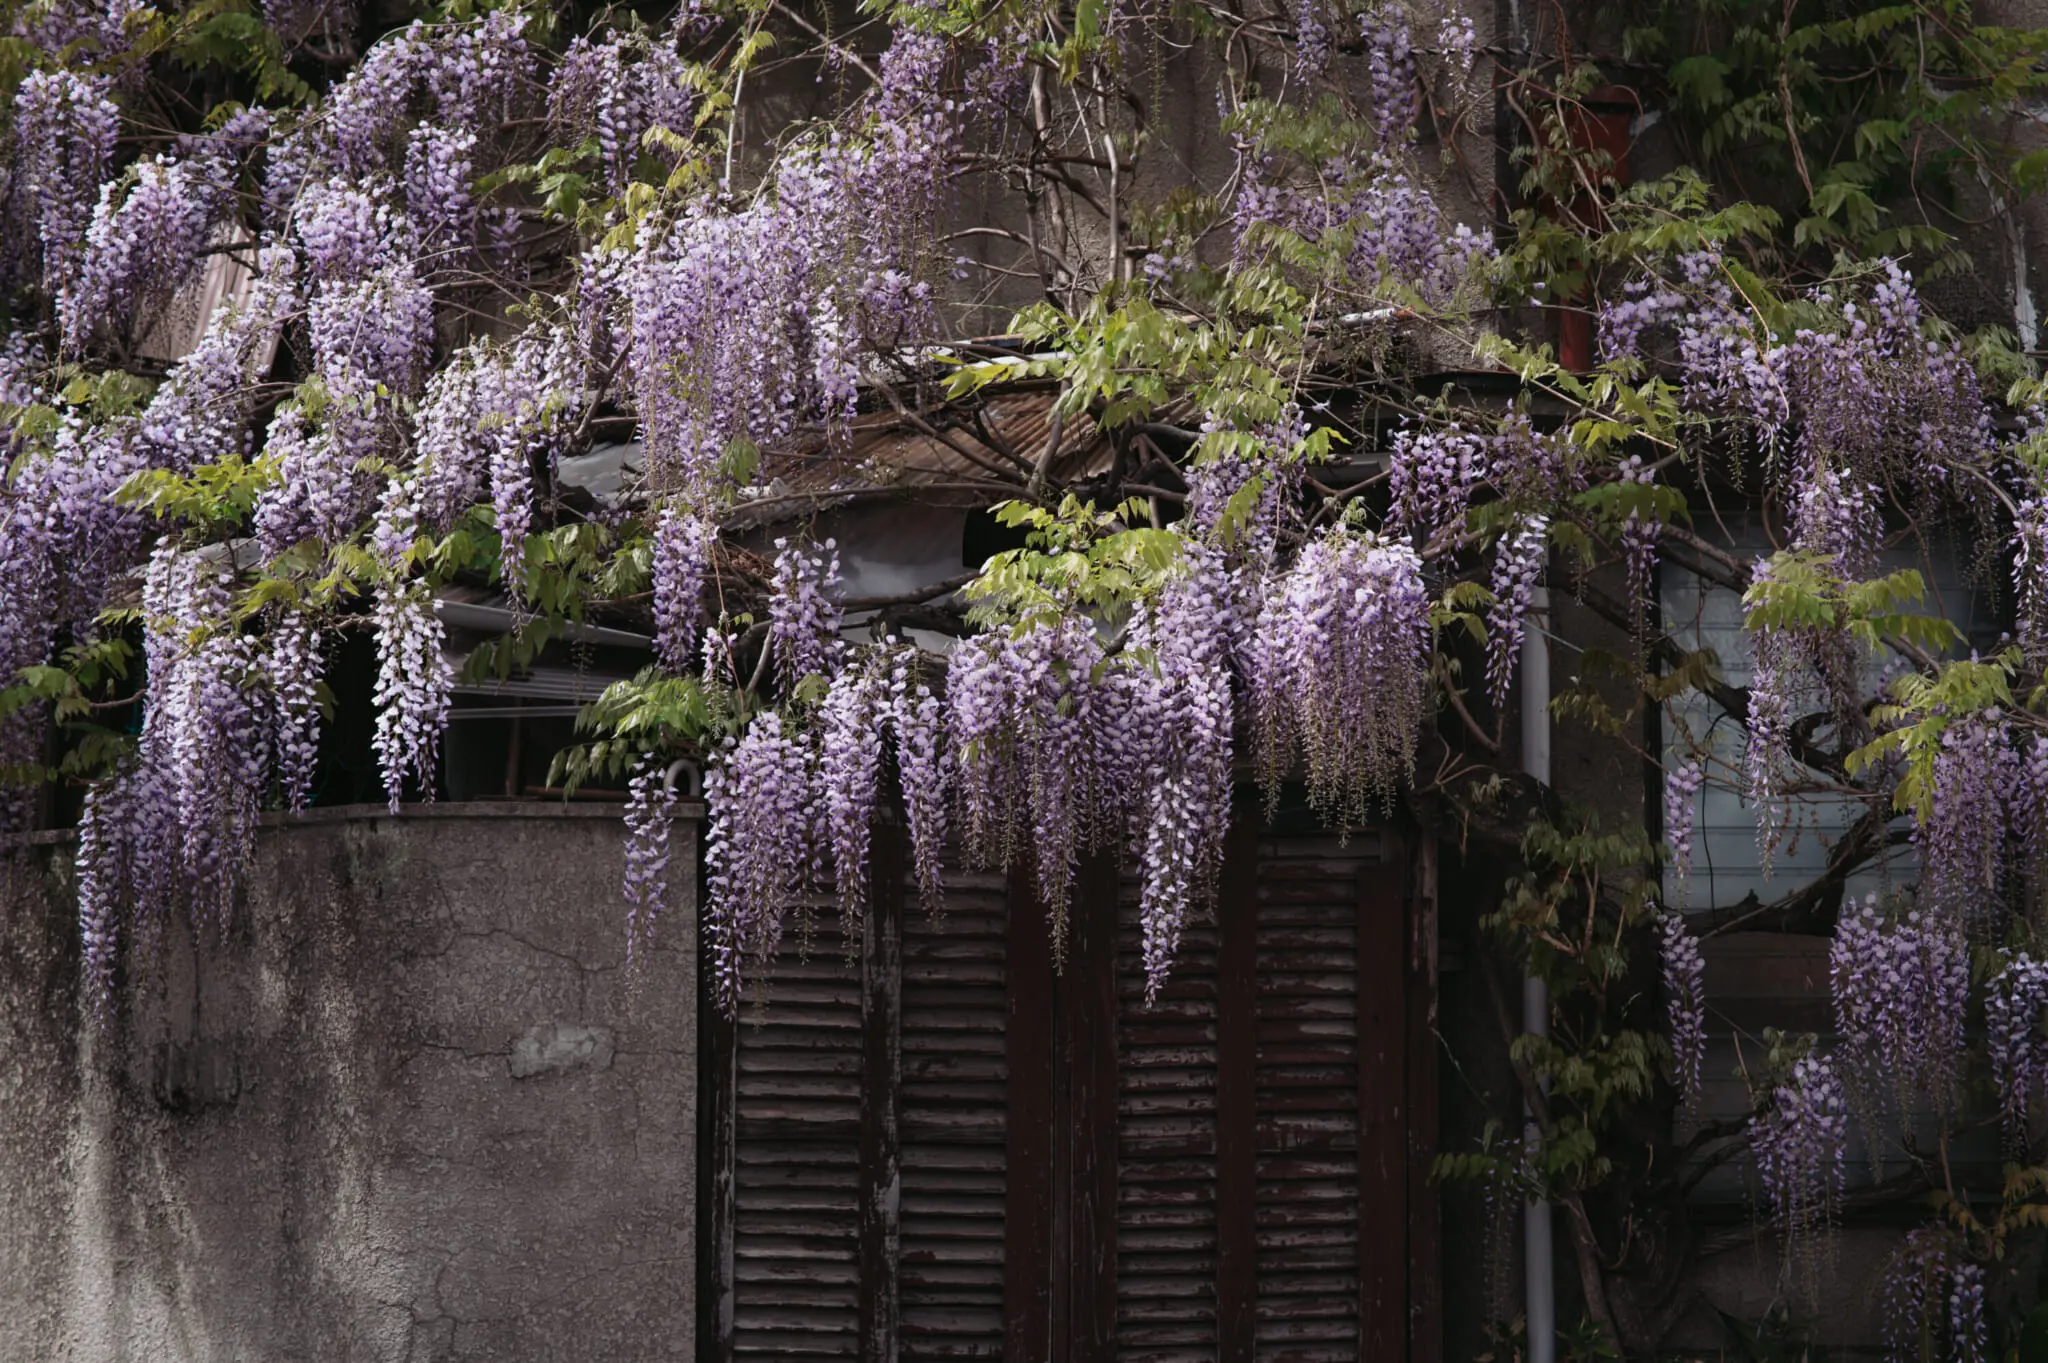 Wisteria in Japan: History, Meaning and Where To Find Them